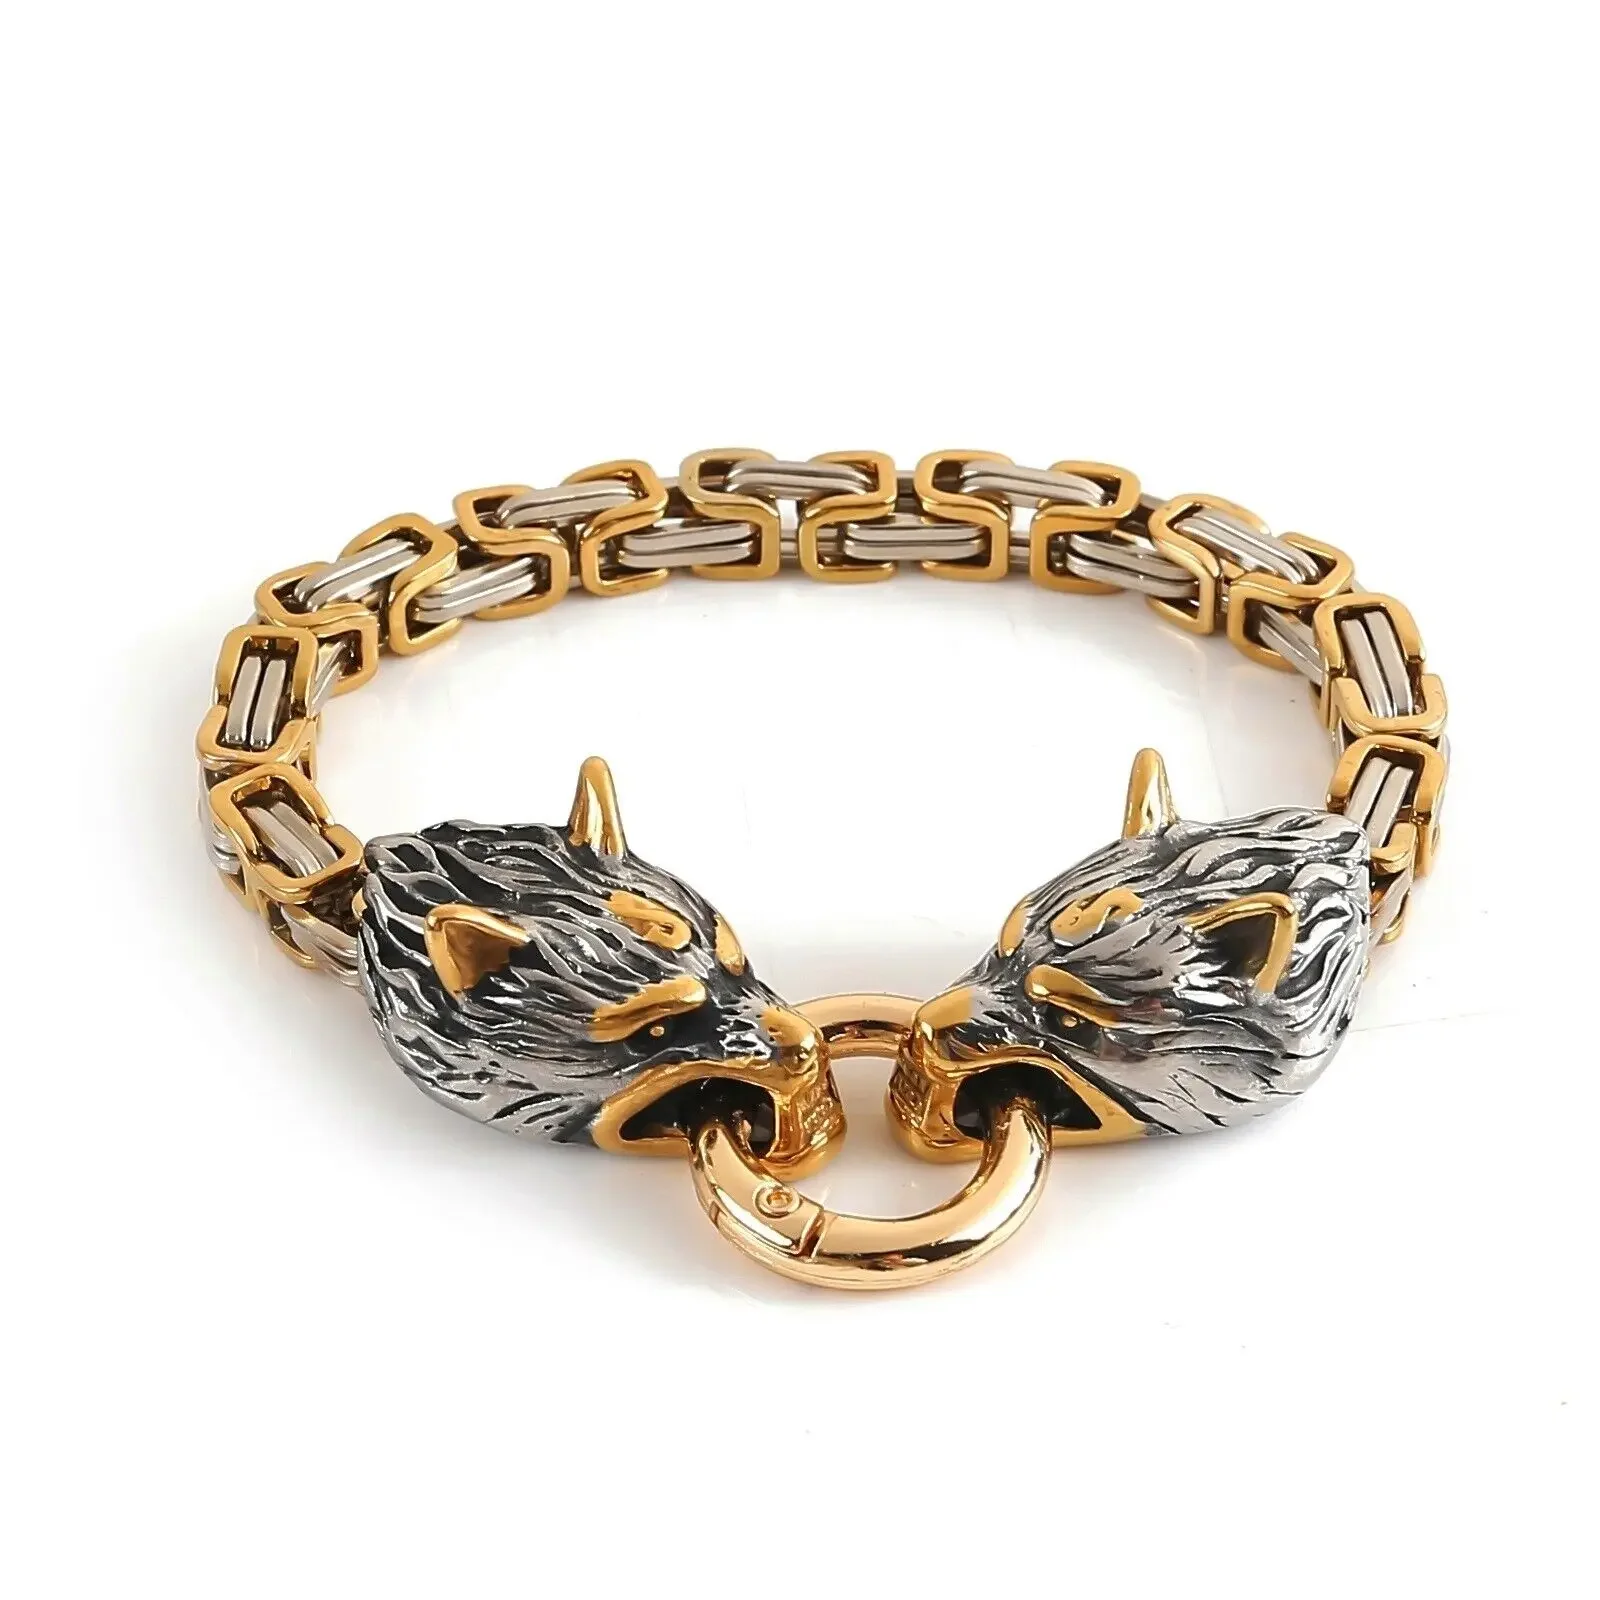 

CHUANGCHENG Vintage Stainless Steel King Chain Viking Fenrir Wolf Head Byzantine Link Bracelet for Mens Chains Jewelry